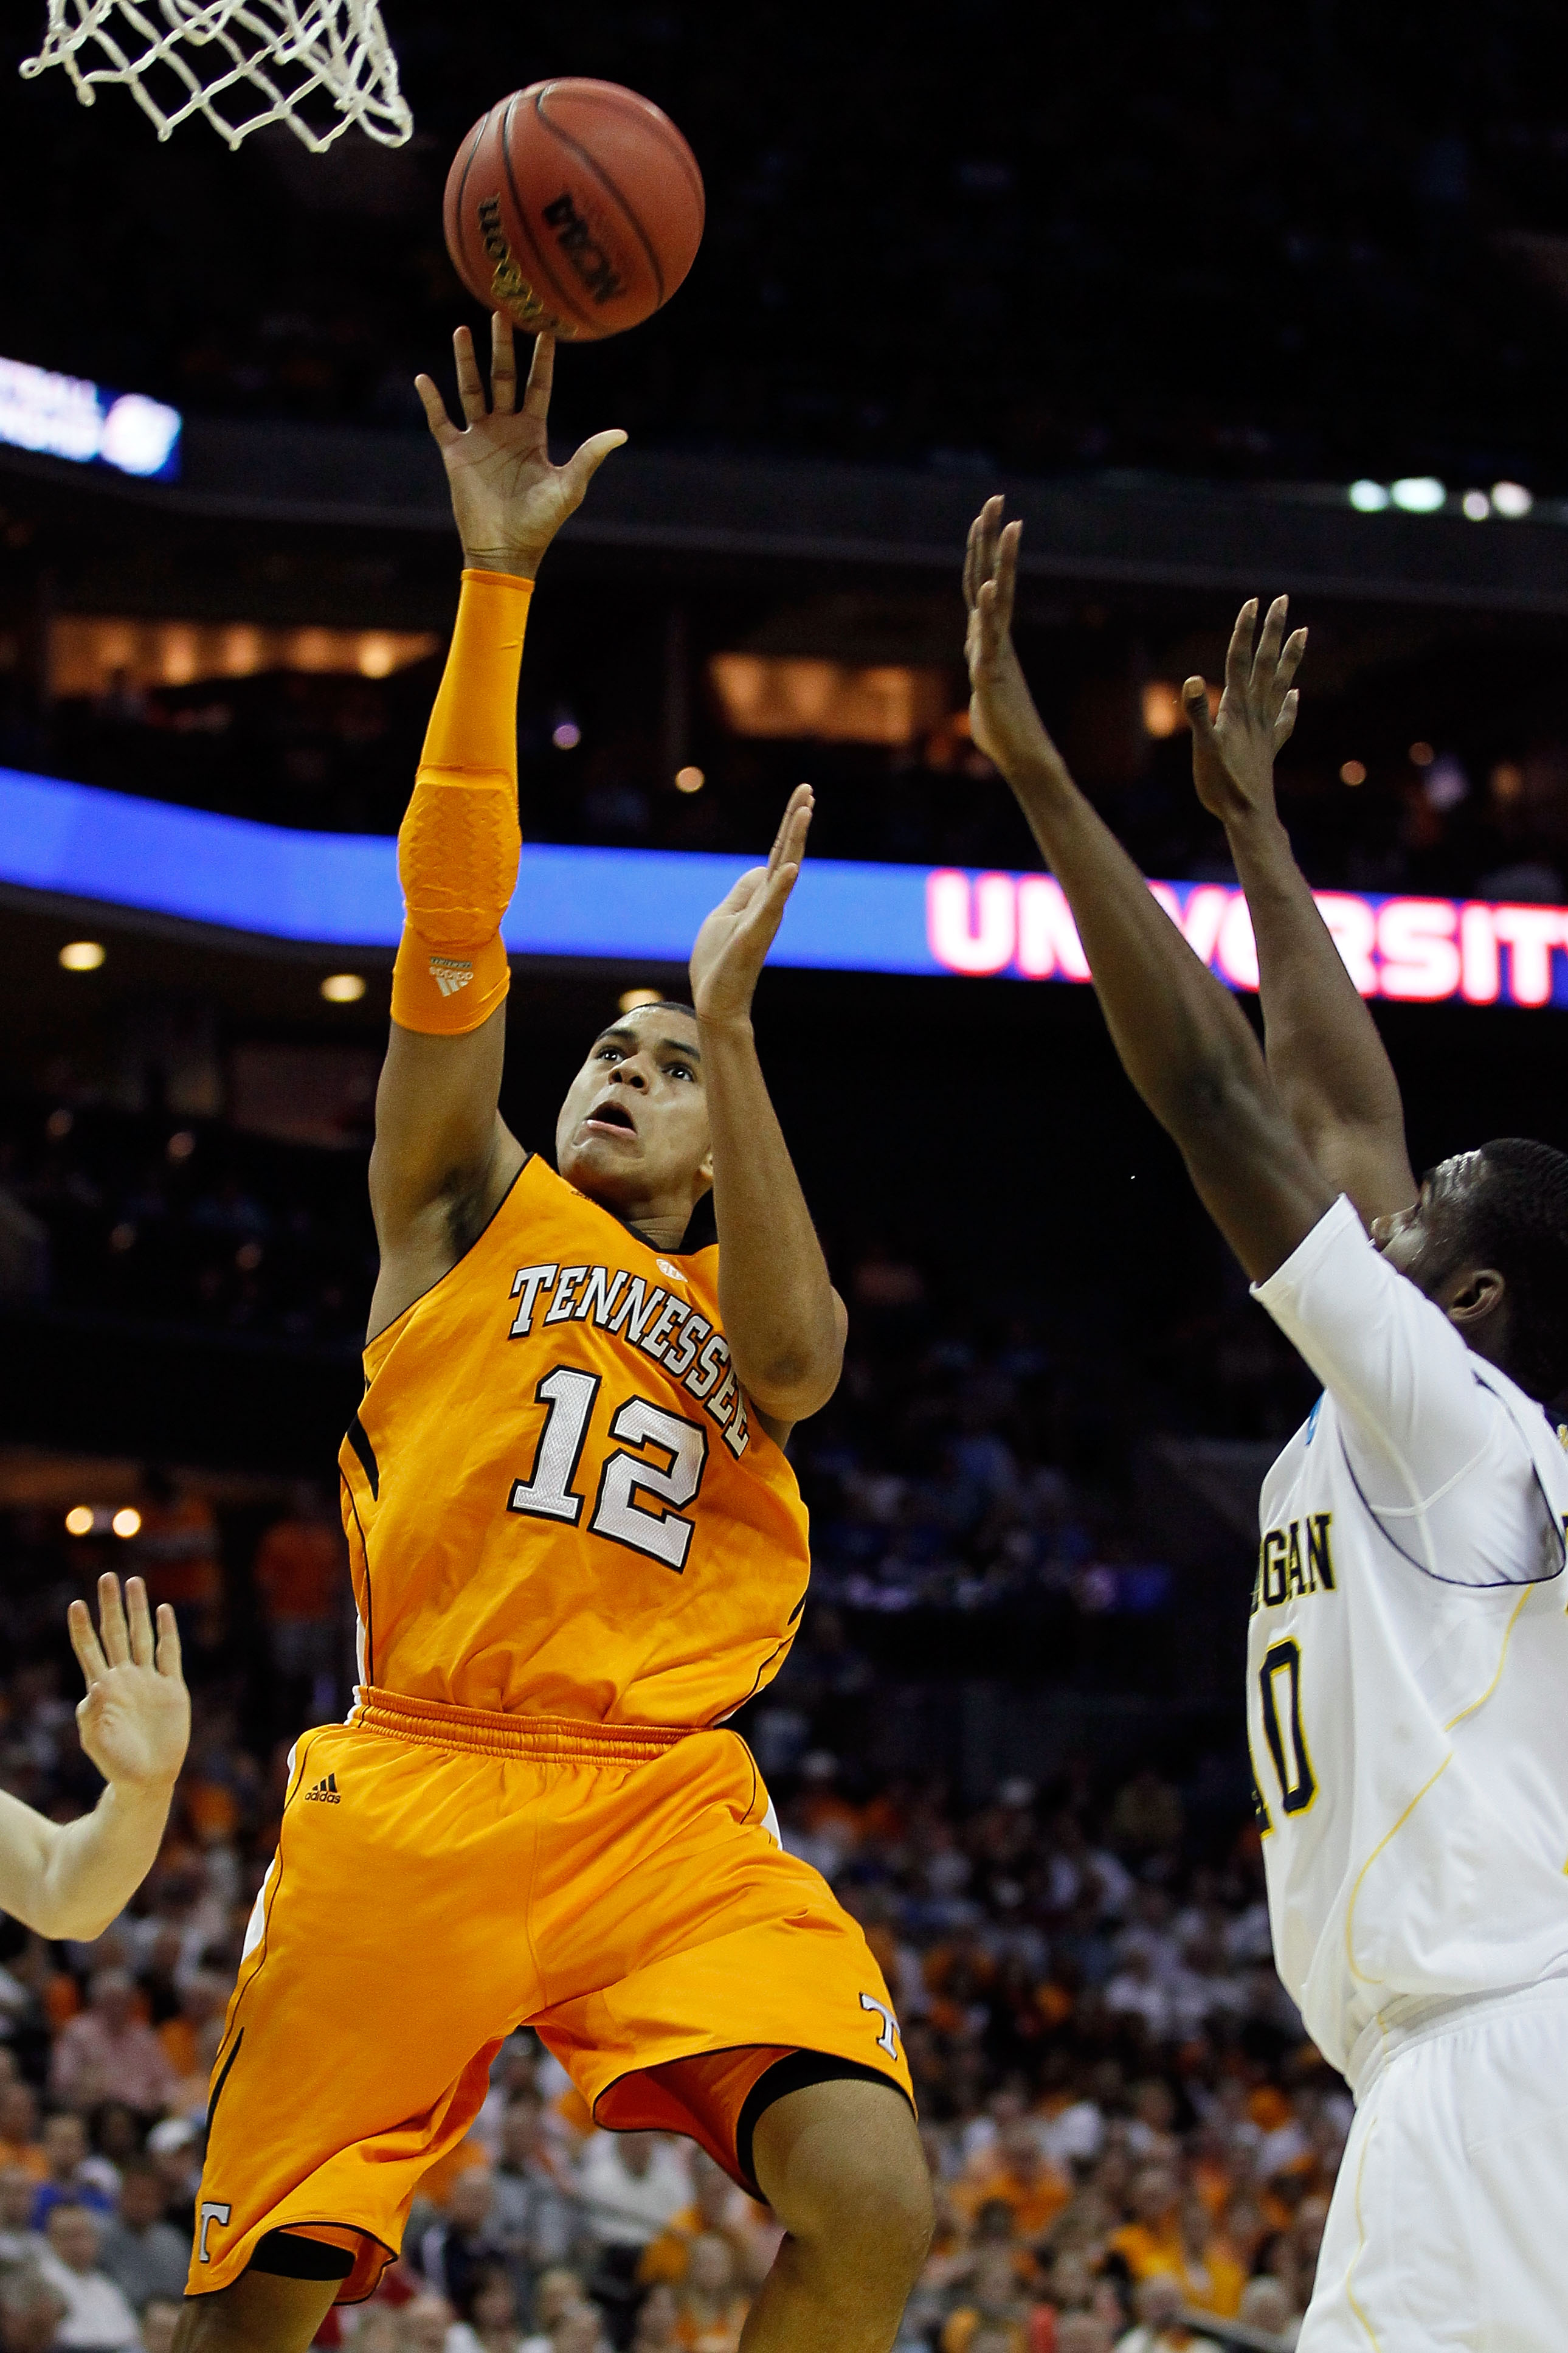 CHARLOTTE, NC - MARCH 18:  Tobias Harris #12 of the Tennessee Volunteers shoots over Tim Hardaway Jr. #10 of the Michigan Wolverines in the first half during the second round of the 2011 NCAA men's basketball tournament at Time Warner Cable Arena on March